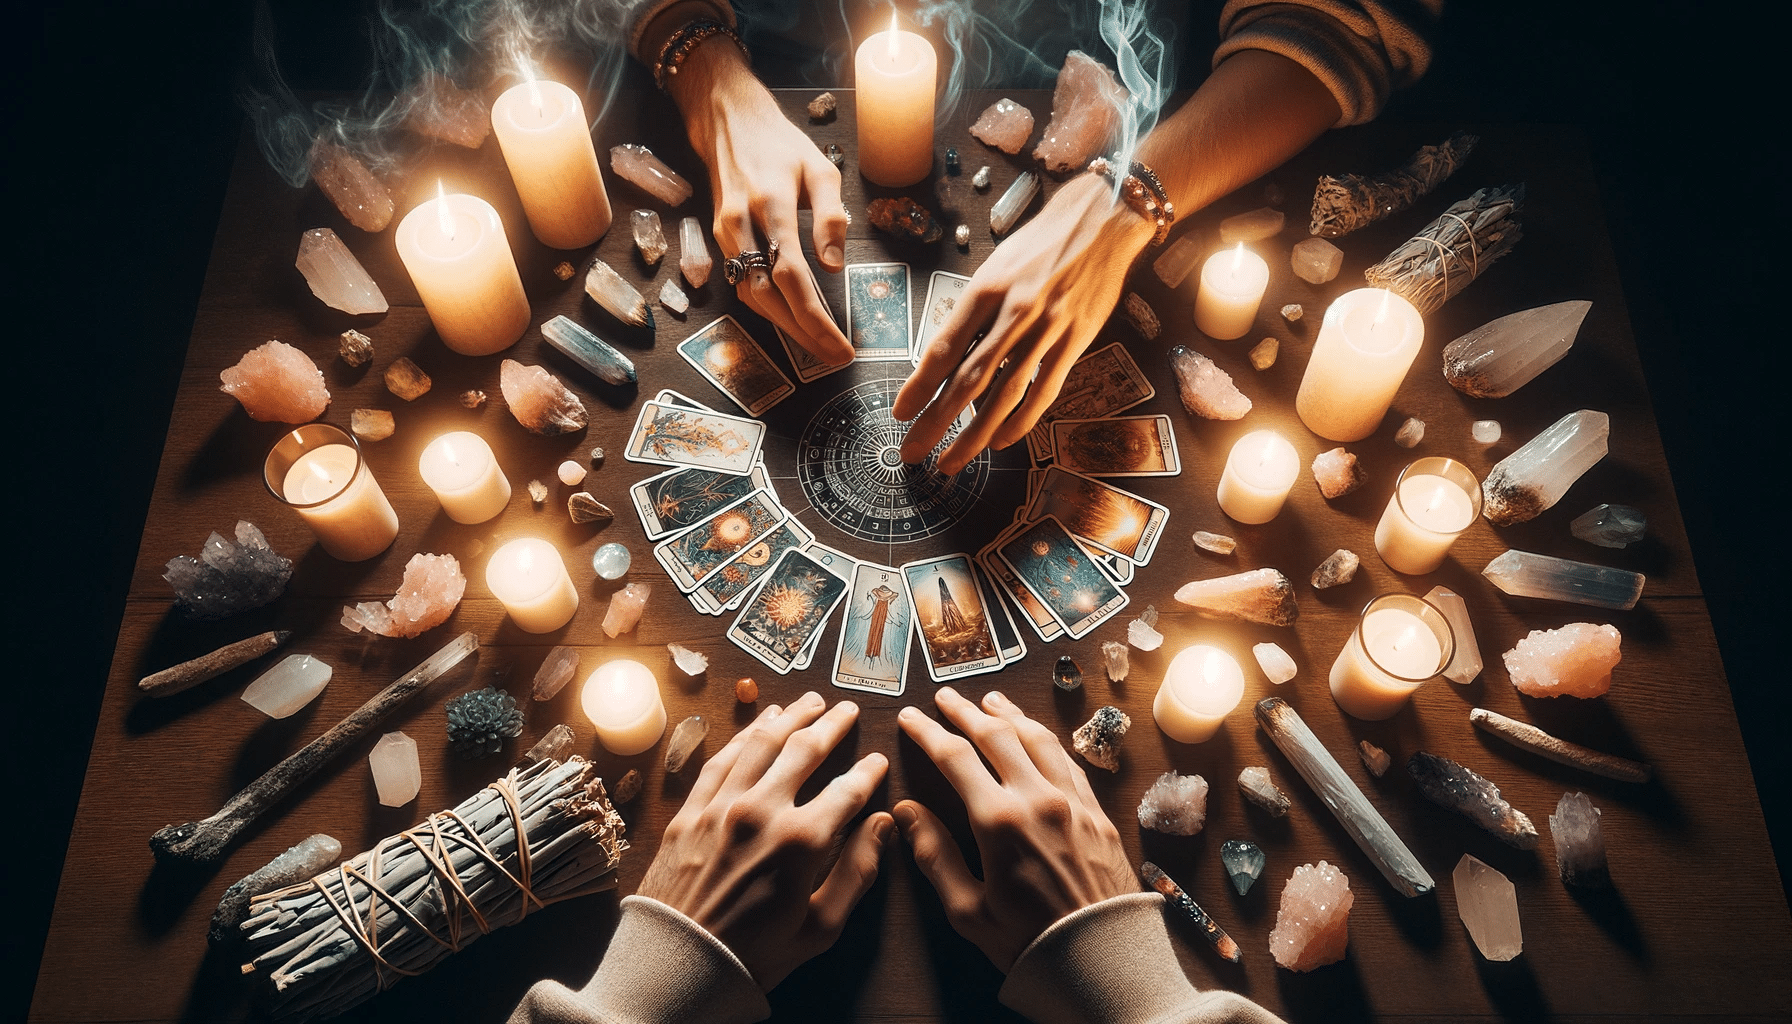 Hands arrange tarot cards in a circle for tarot card interpretation for healing, surrounded by crystals, candles, and sage smoke.